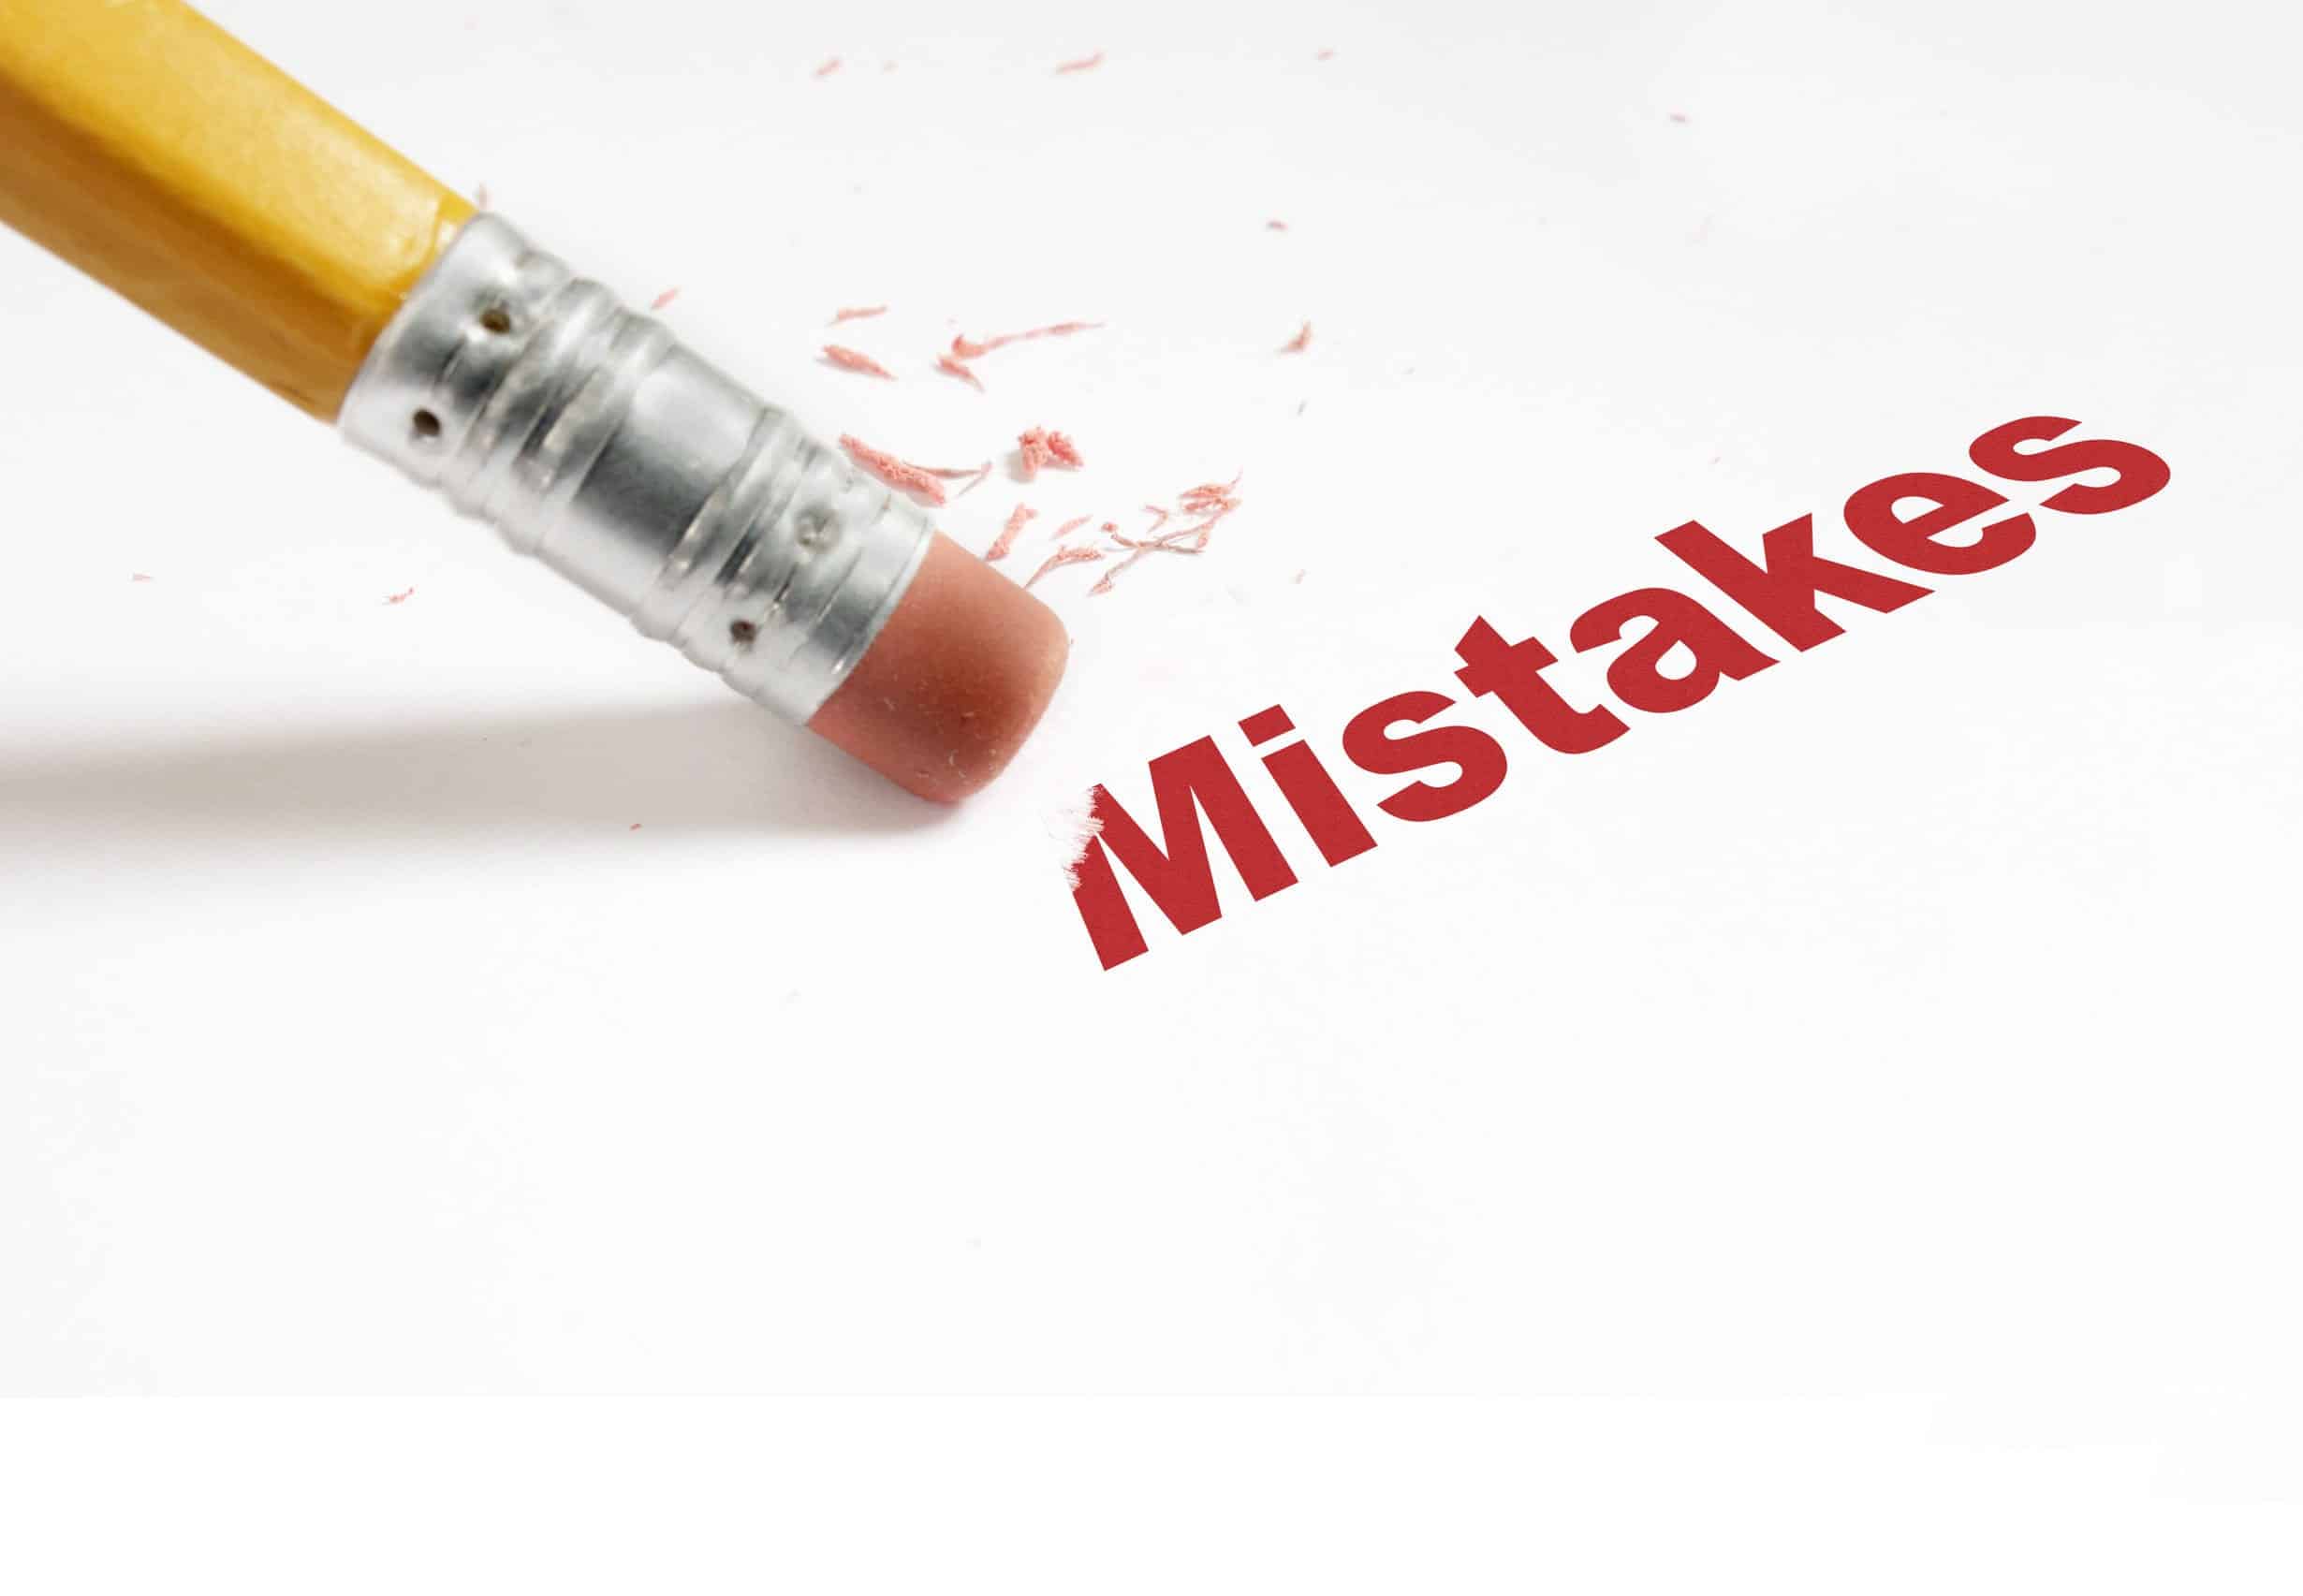 Leadership mistakes that impact effectiveness.